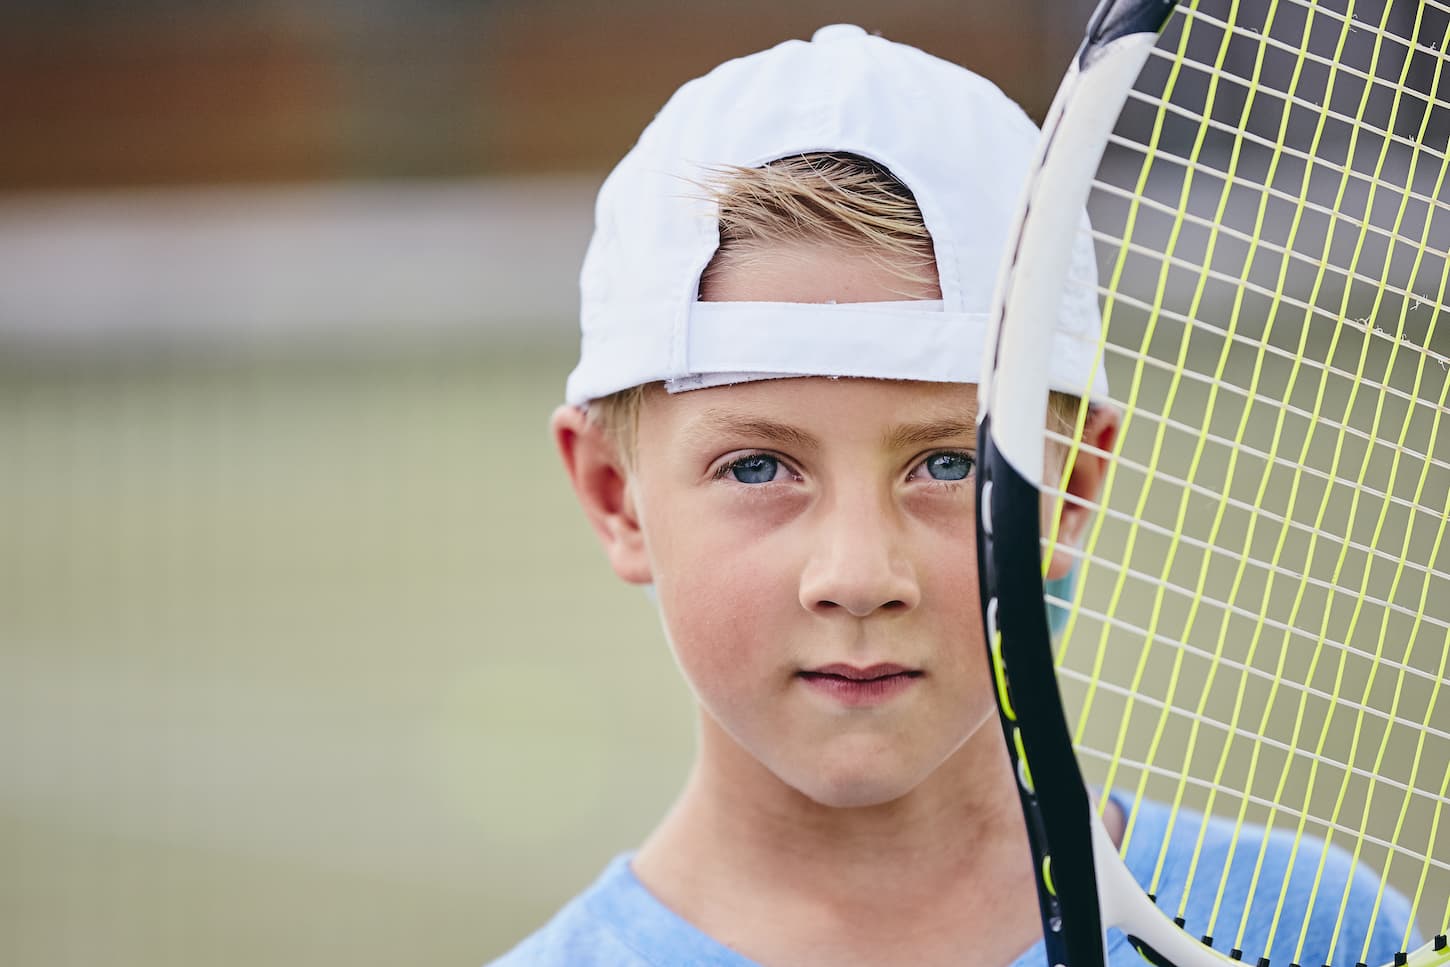 An image of a little boy holding a tennis racket on the court.